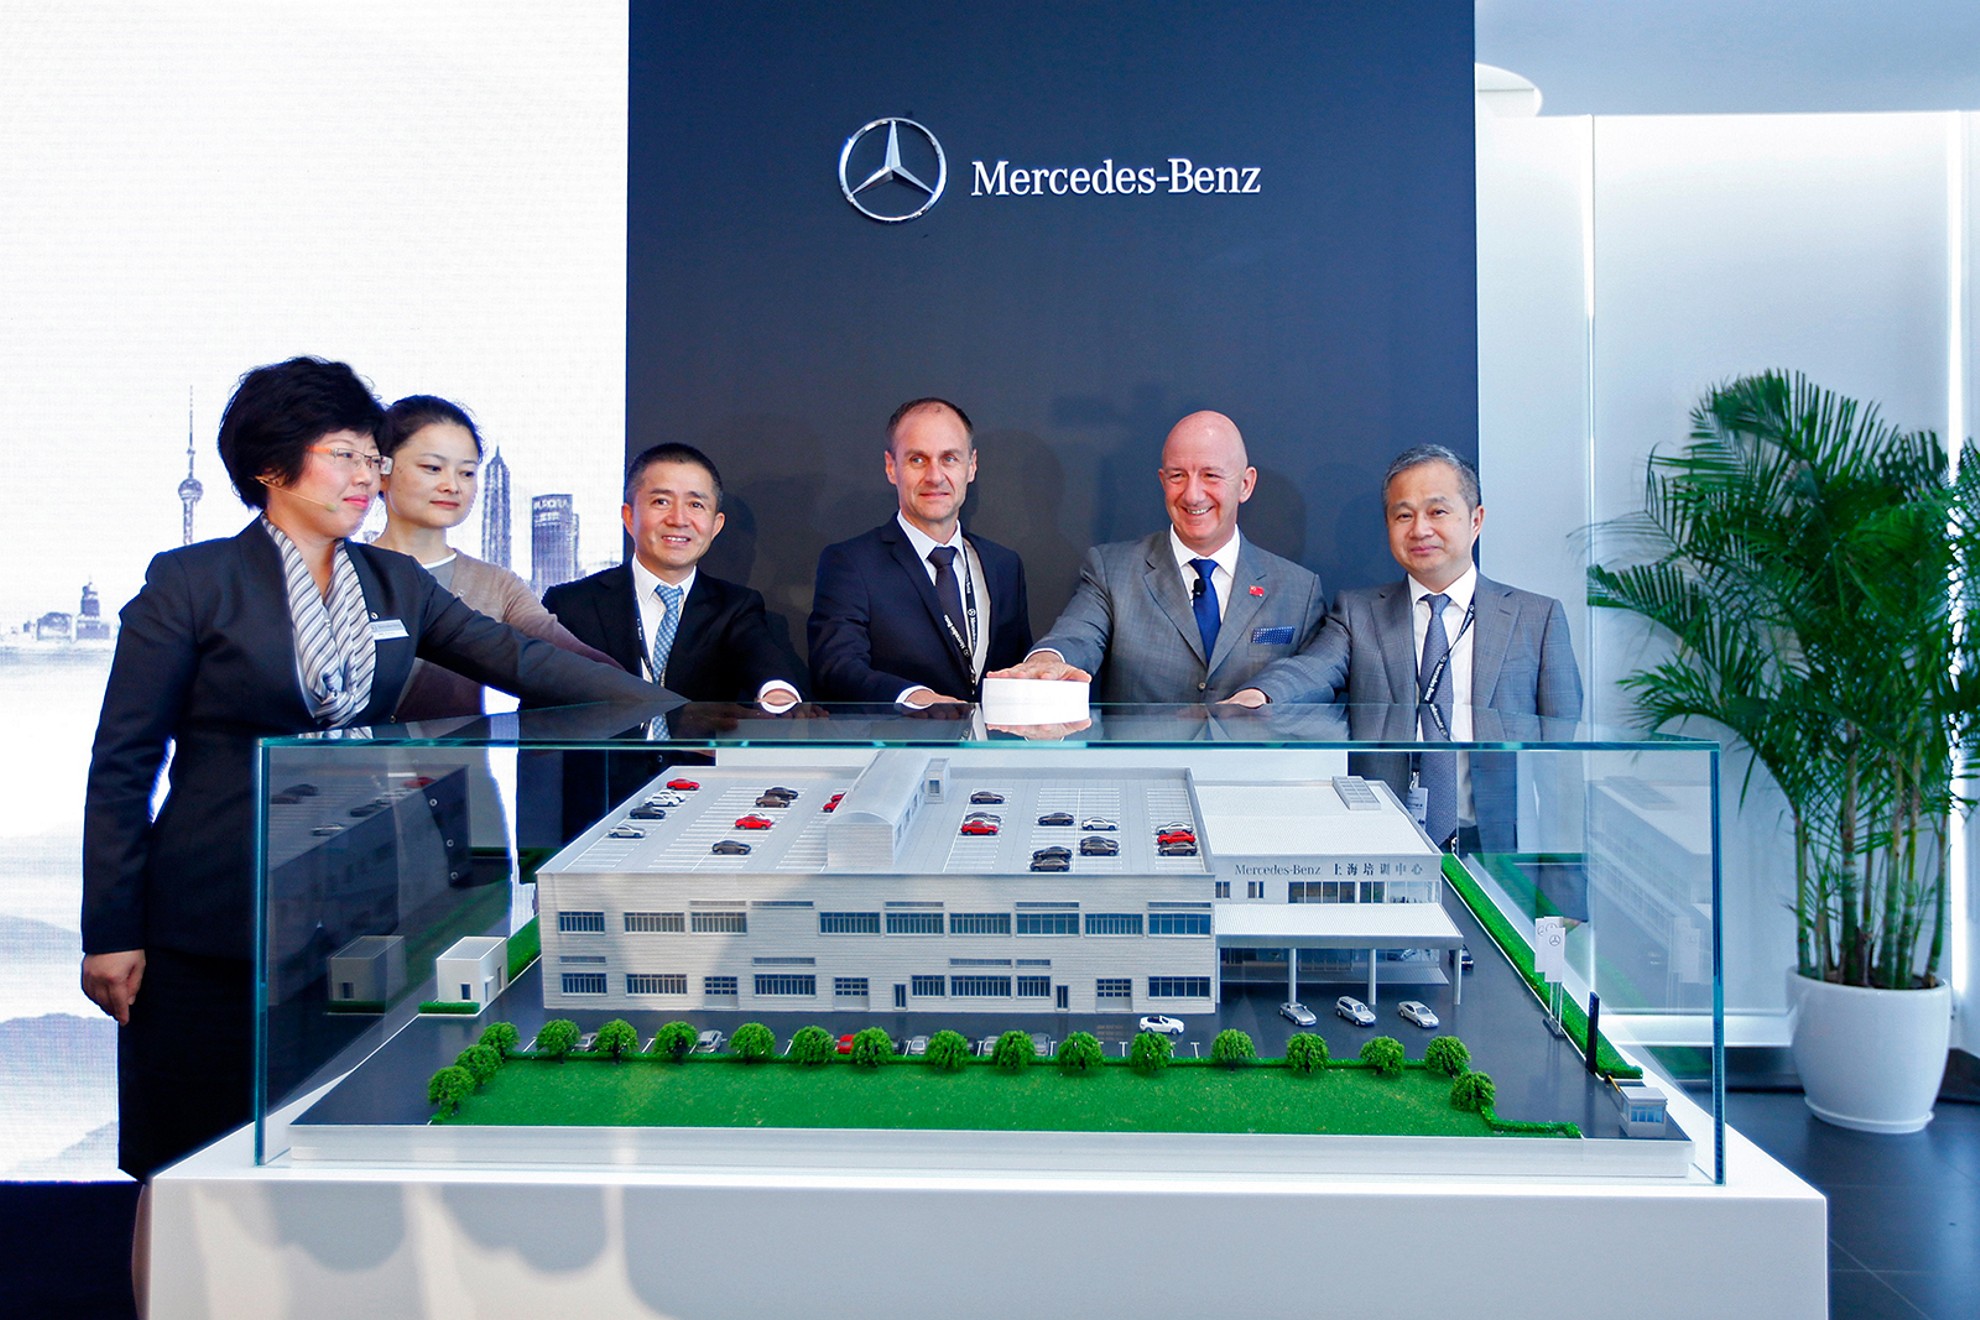 Mercedes-Benz Opens in China its Largest Passenger Car Training Center in the World